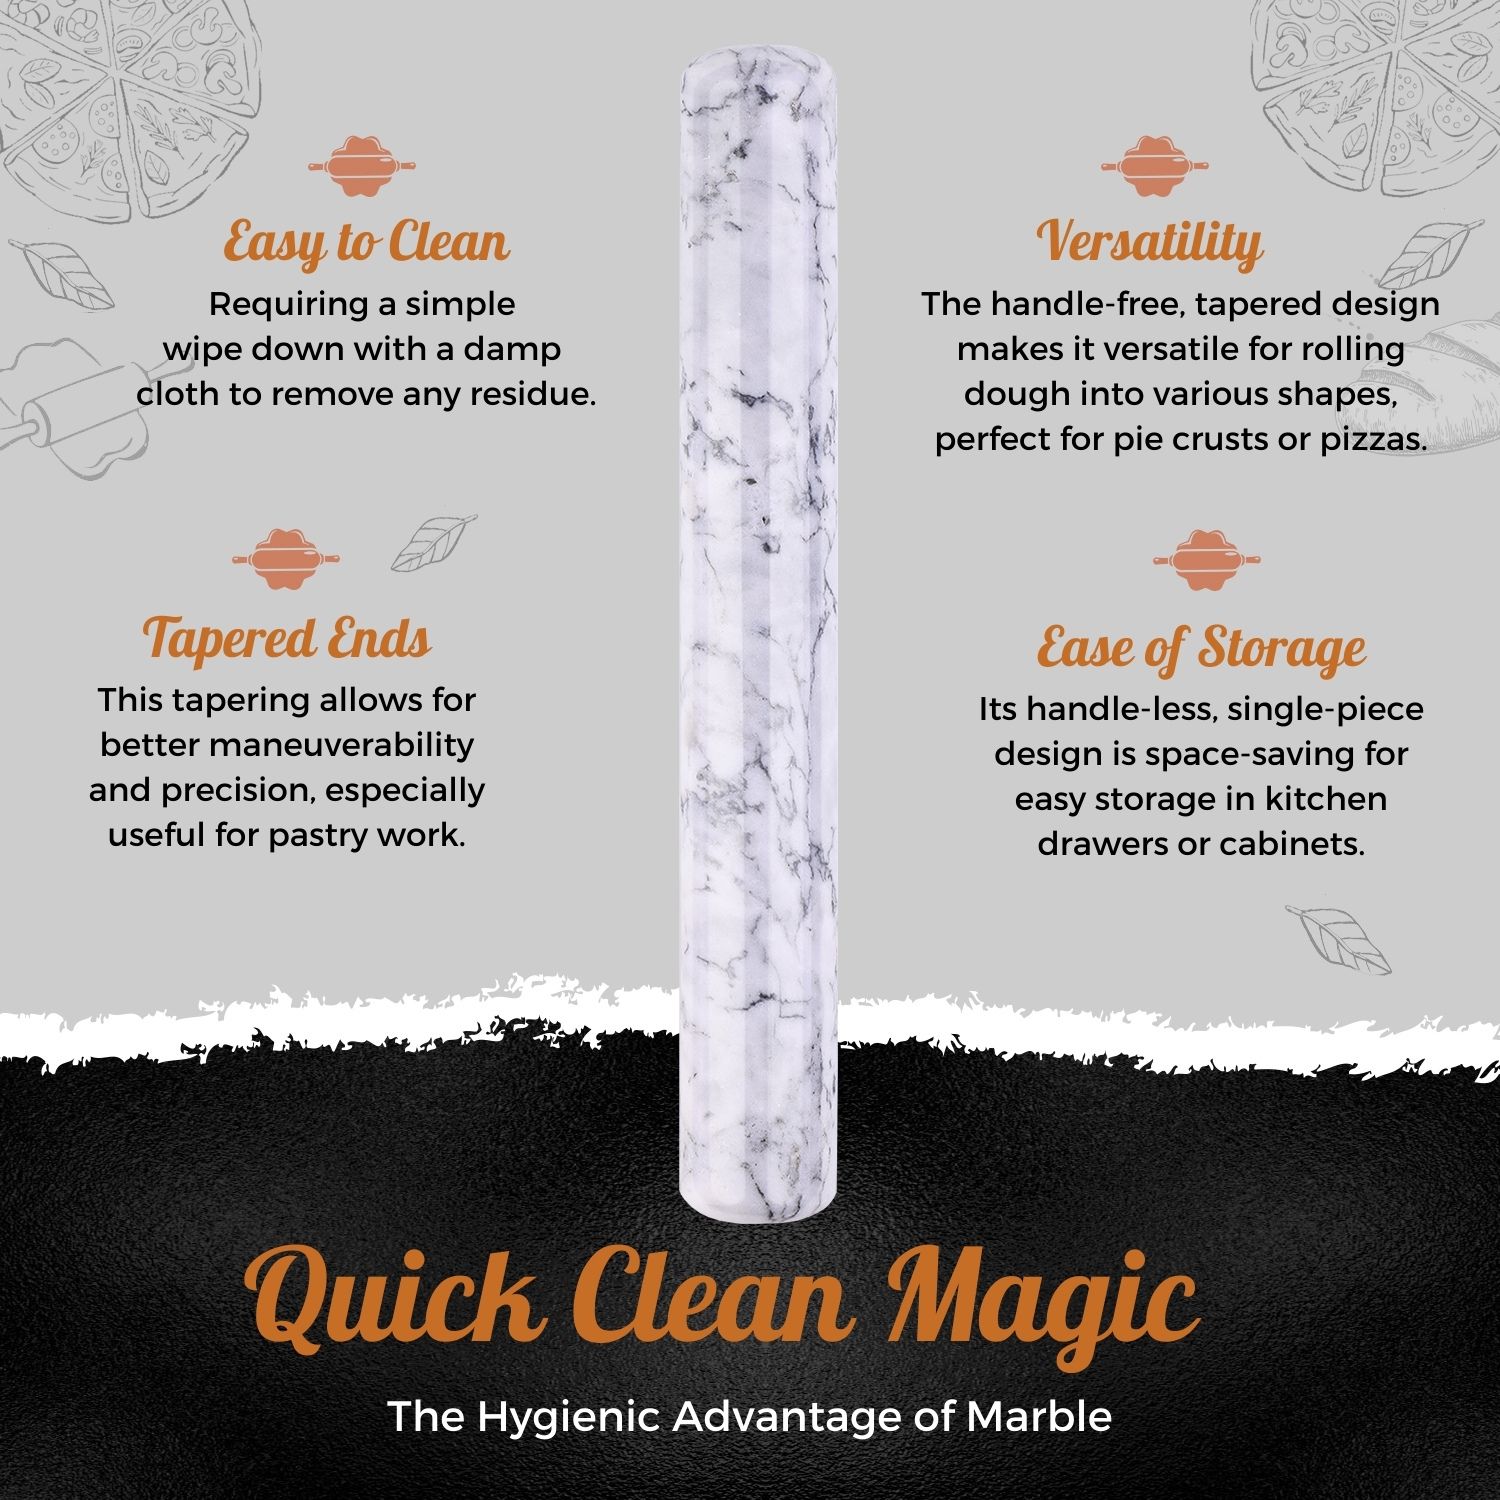 Hygienic and Easy-To-Clean - Compared to other baking roller stick, the non-porous surface of this marble rolling pin is easy to maintain and clean. Right after using it, you can wash it with warm soapy water and towel dry thoroughly. A clean and well-taken care rolling pin can last forever